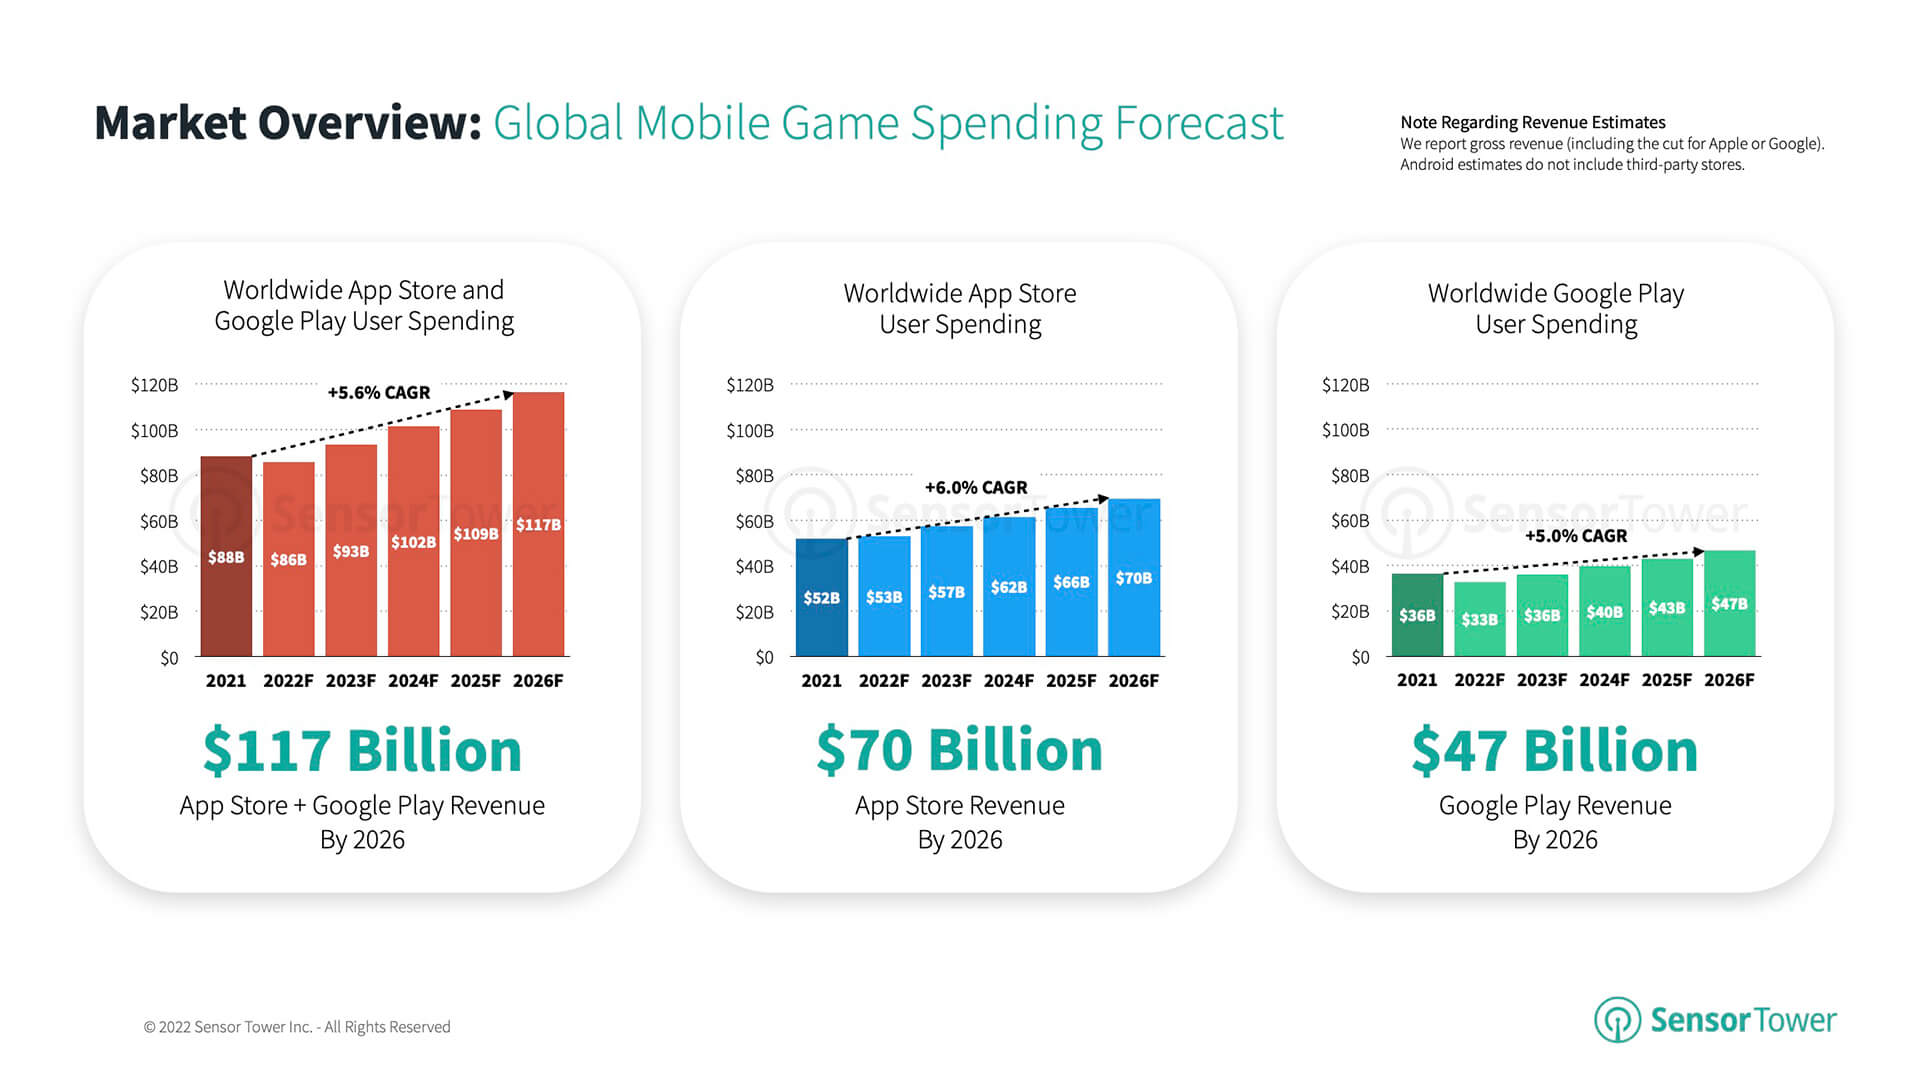 80% of  Gaming's esports content in 2022 was for mobile